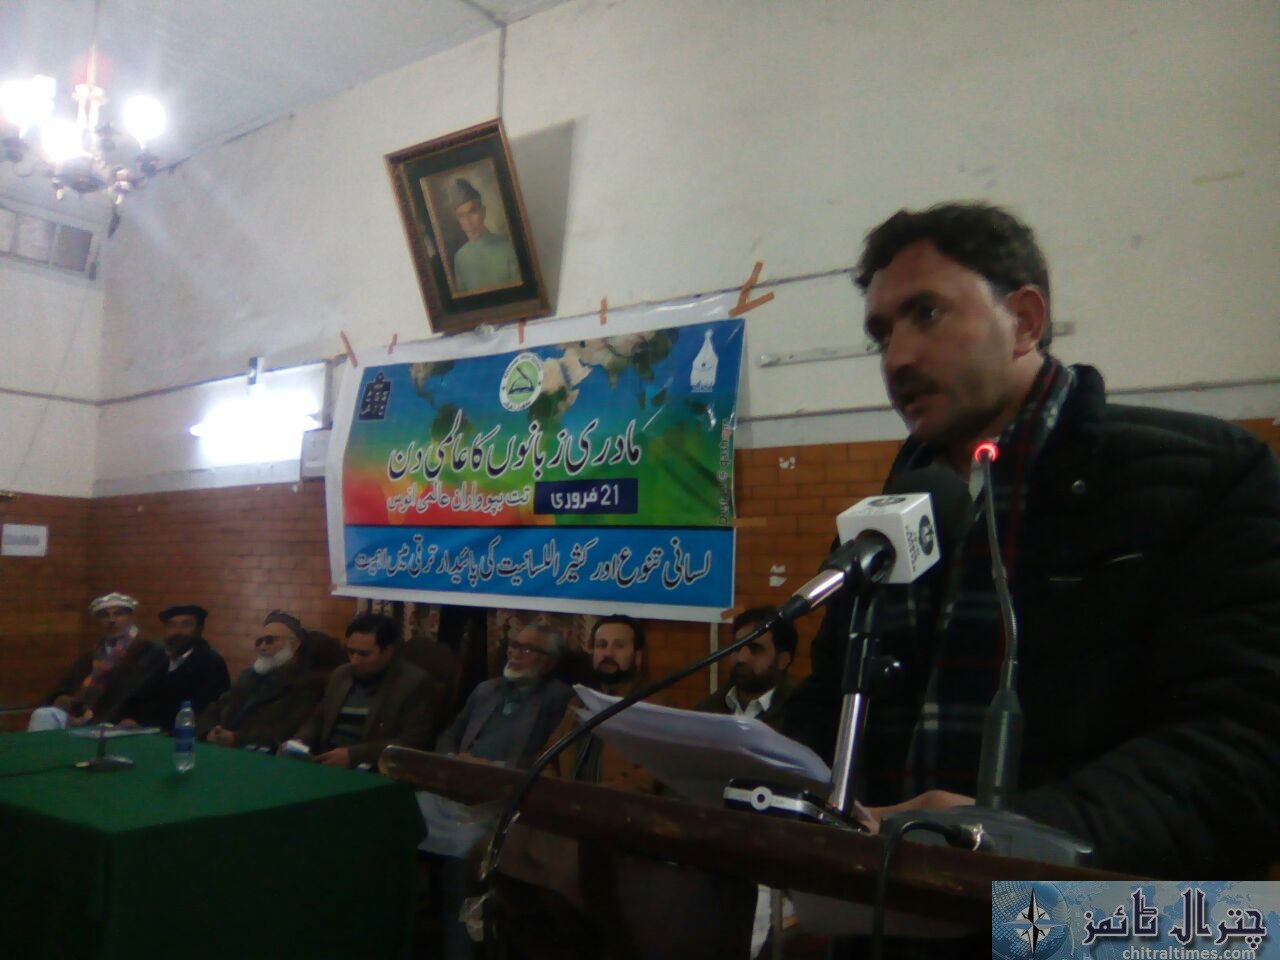 international languages day celebrated in Chitral 10